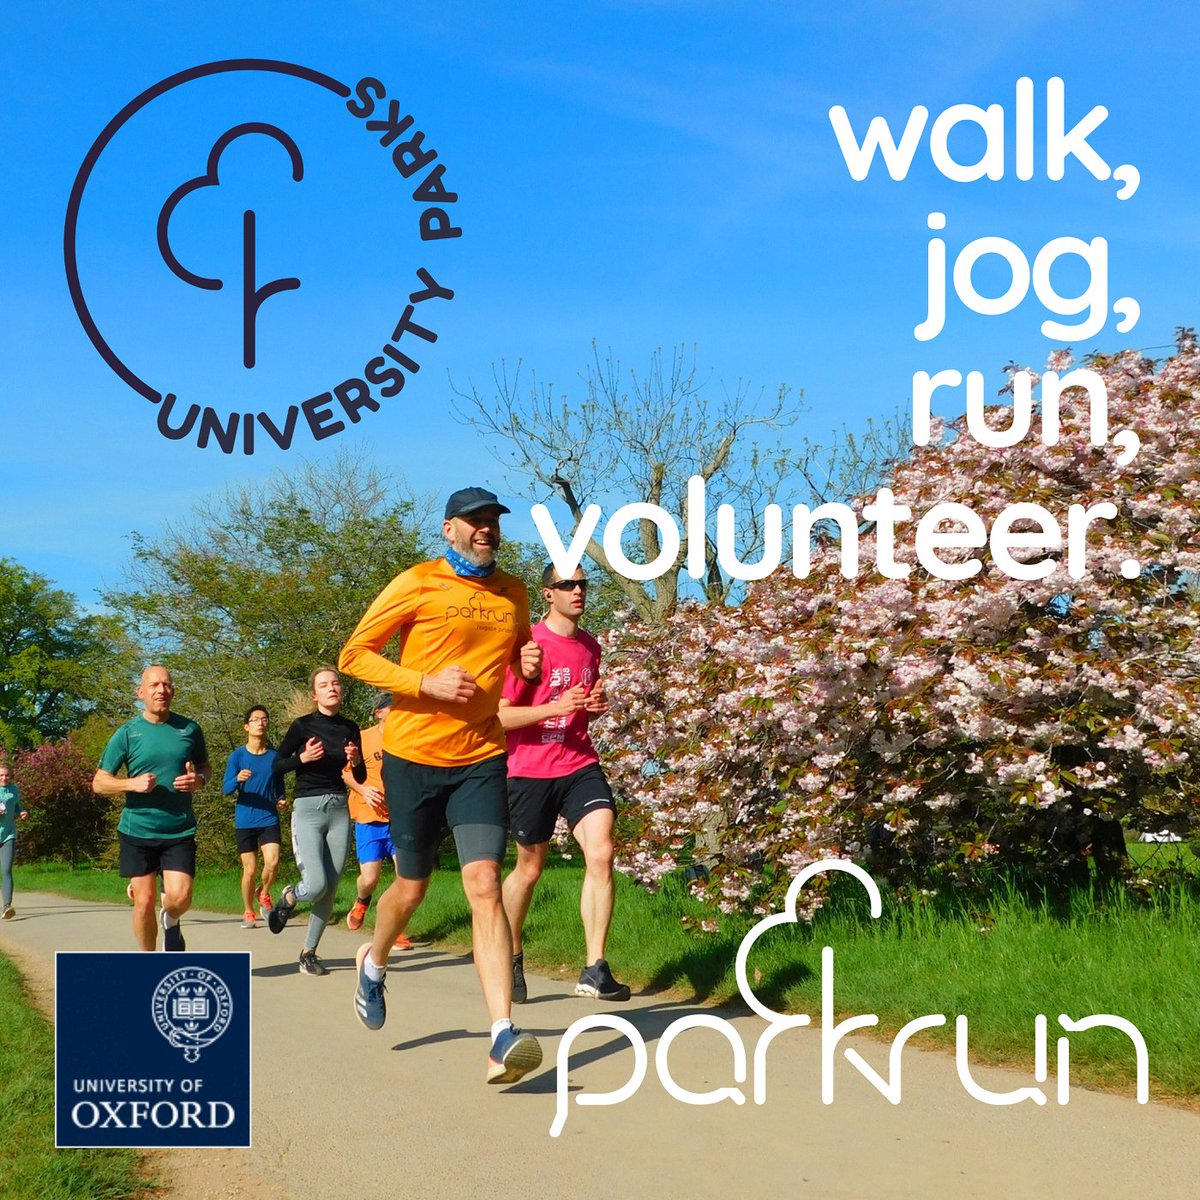 Saturday is parkrun day 🏃! Join the hundreds of walkers, joggers, and runners who take part in a free, weekly 5km at University Parks parkrun in the heart of Oxford. Register with parkrun for free and bring your barcode along ▶️ parkrun.org.uk/register @parkrunUK